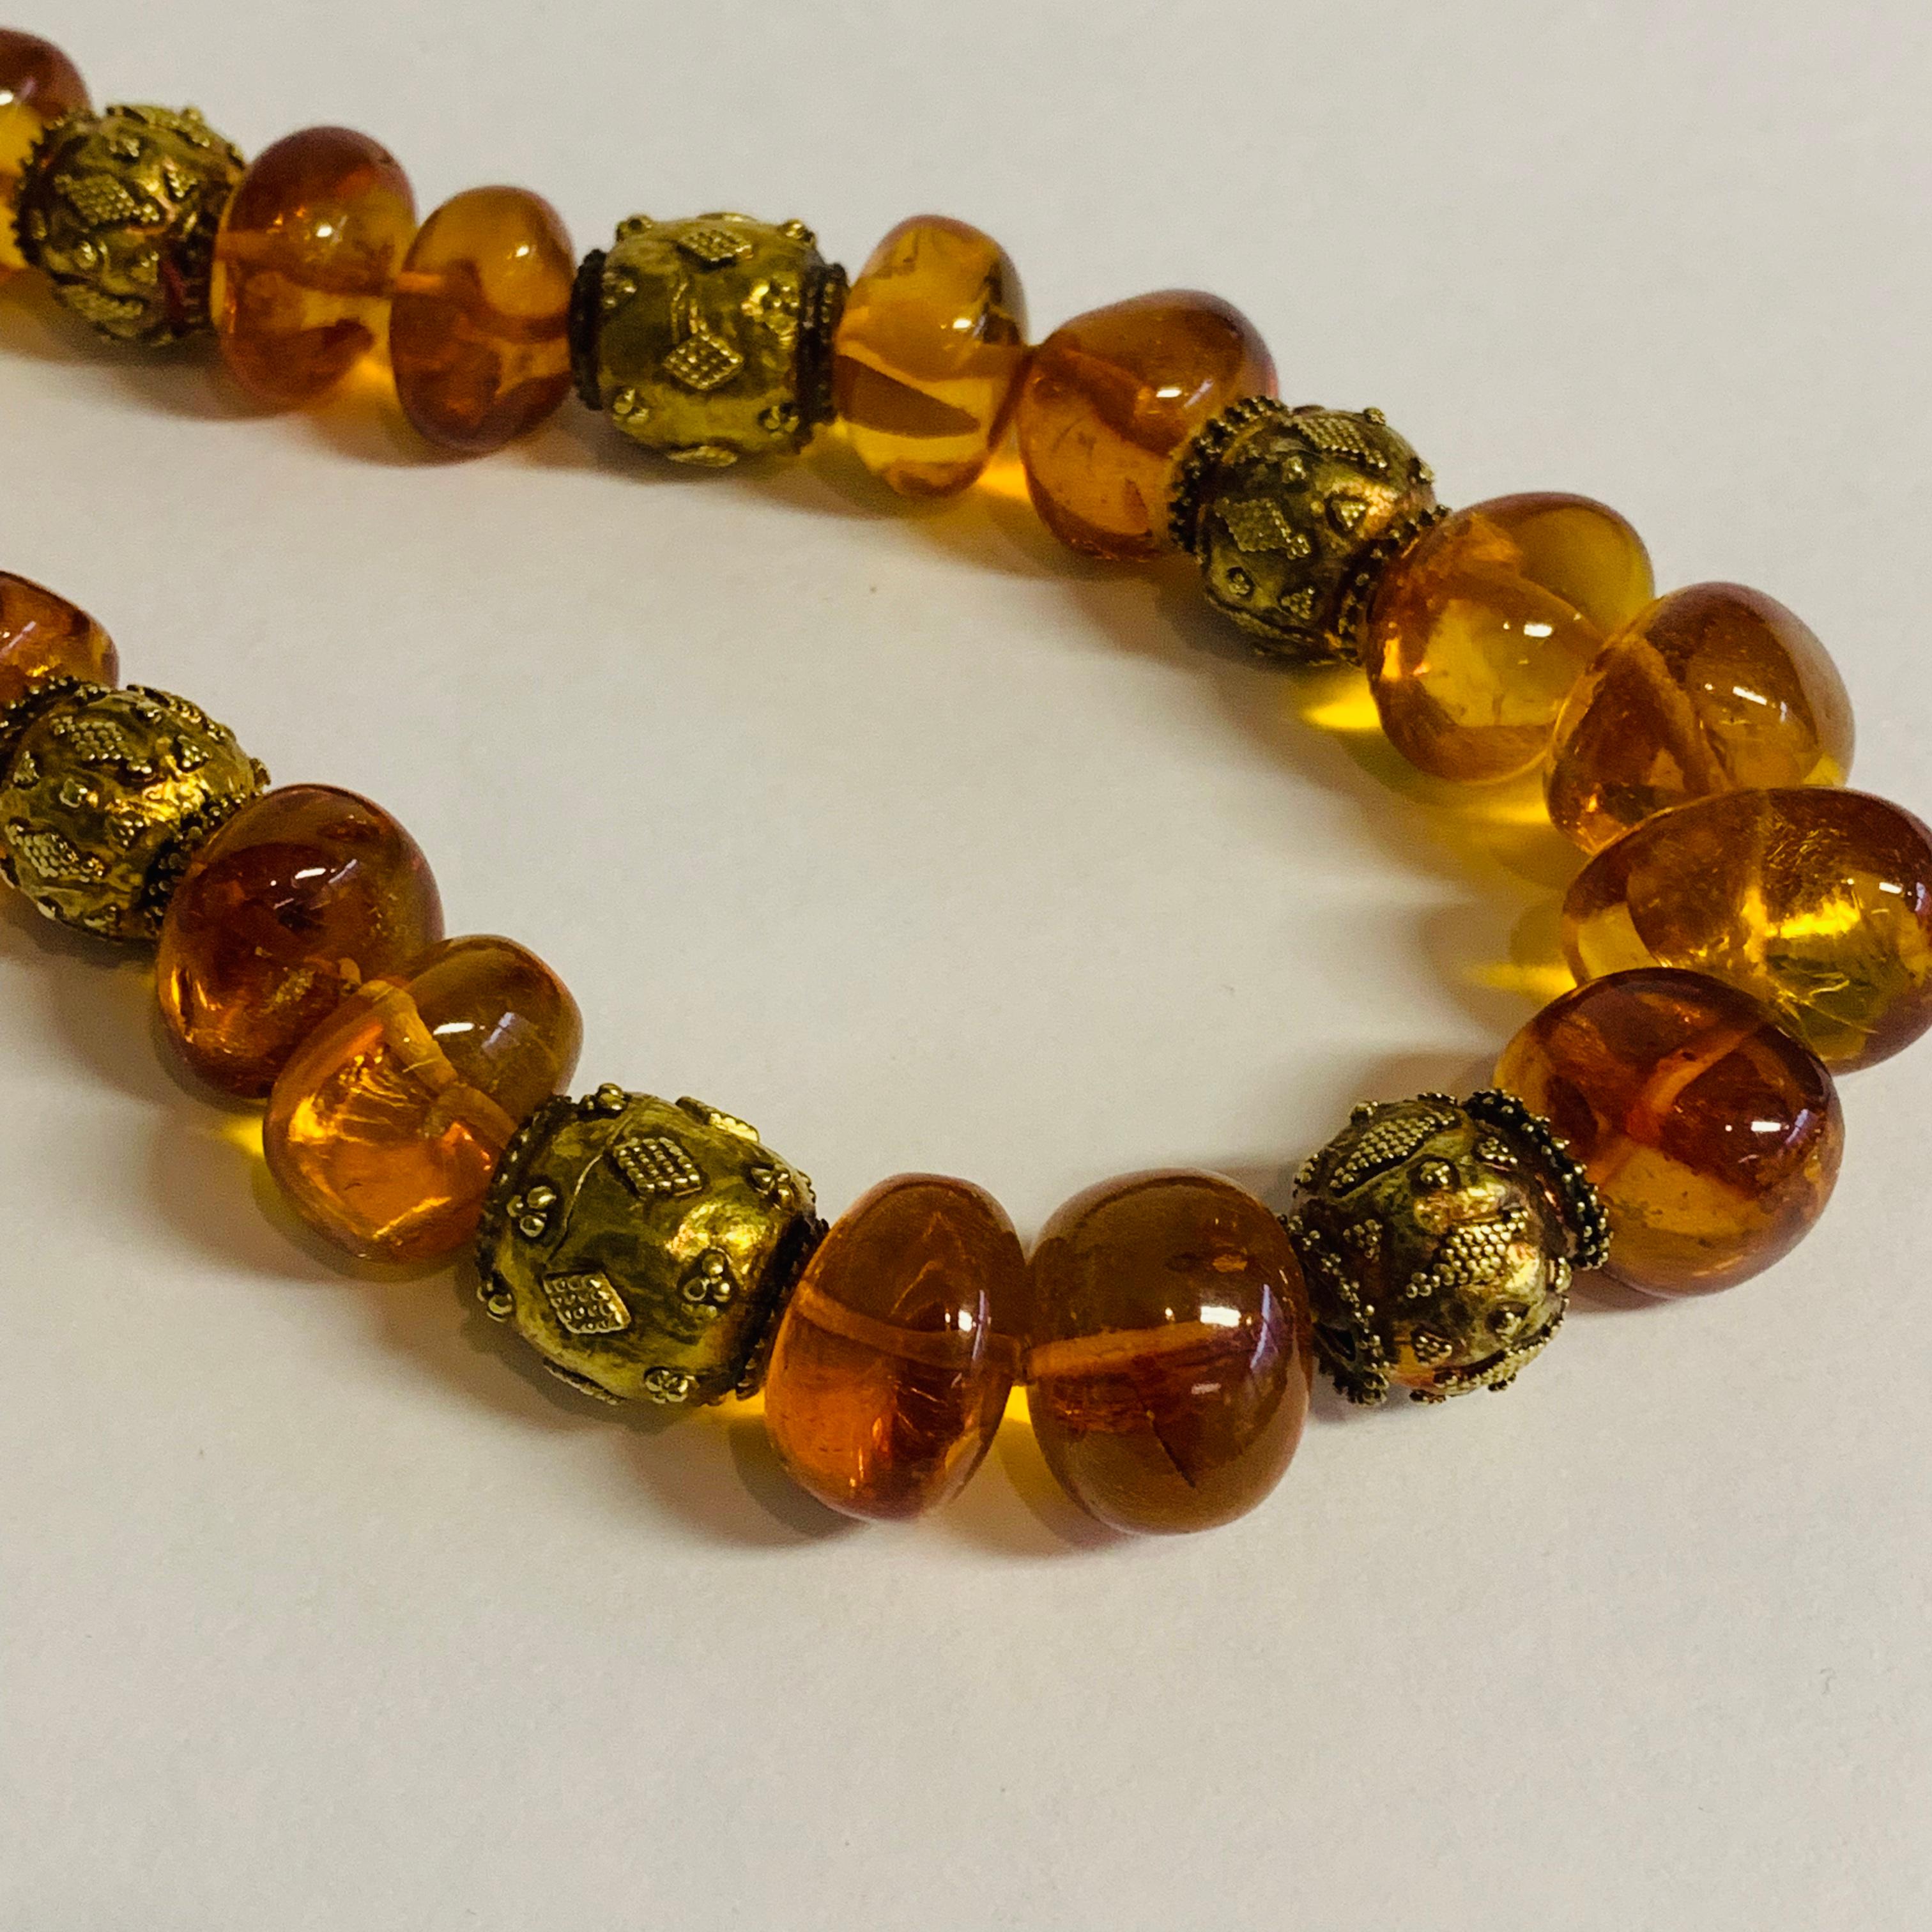 This beautiful necklace of large graduated Baltic amber beads is mixed with stunning old Indian 18k gold decorative beads.  A unique and highly artistic piece incorporating the work of fine artisan goldsmiths.

Designed by AMANDA CLARK for Altfield,